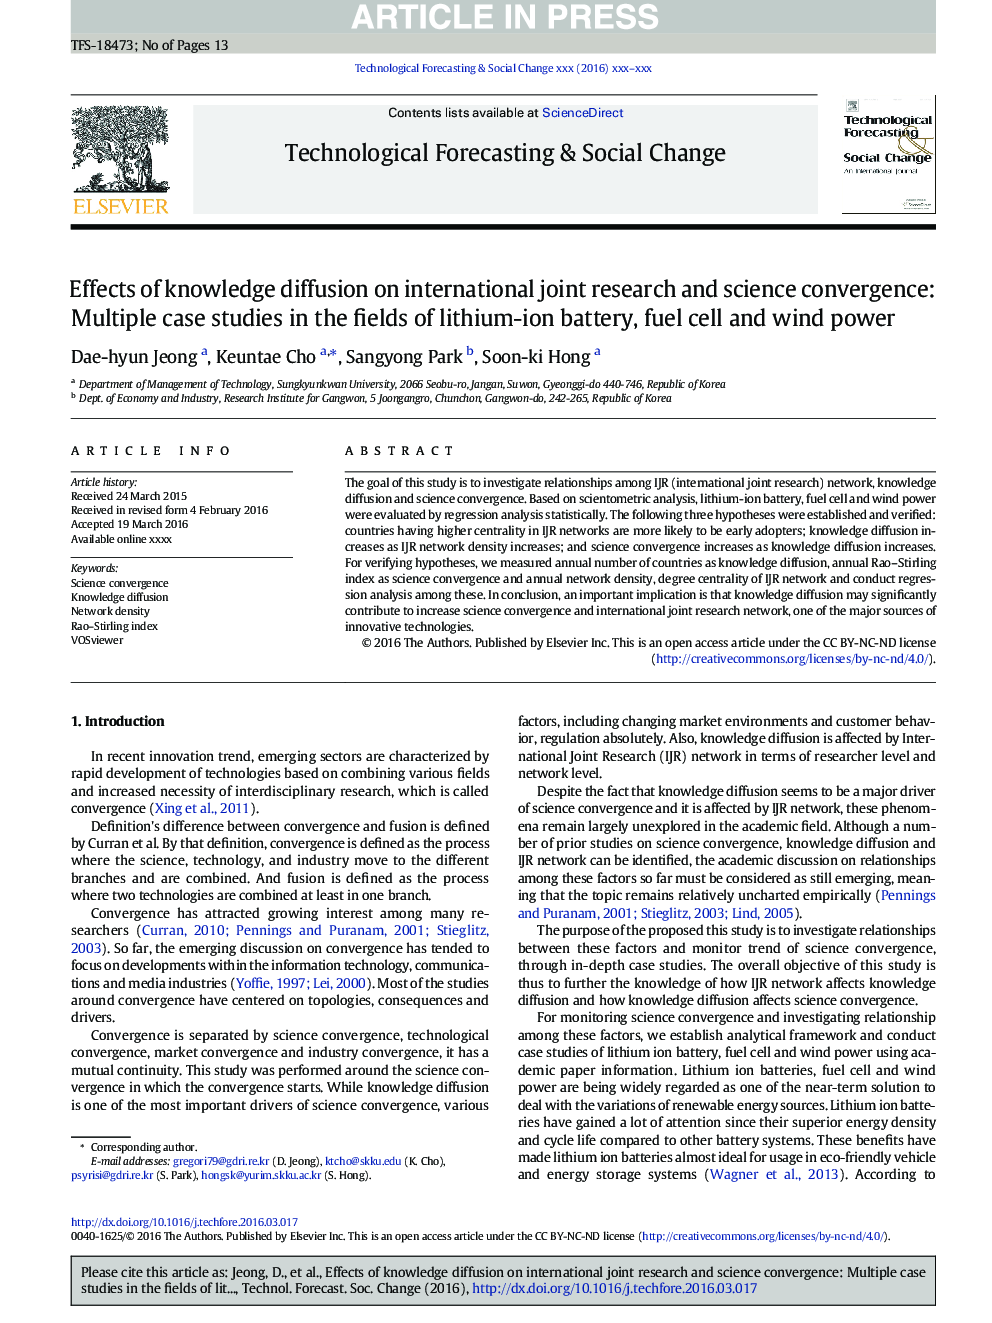 Effects of knowledge diffusion on international joint research and science convergence: Multiple case studies in the fields of lithium-ion battery, fuel cell and wind power